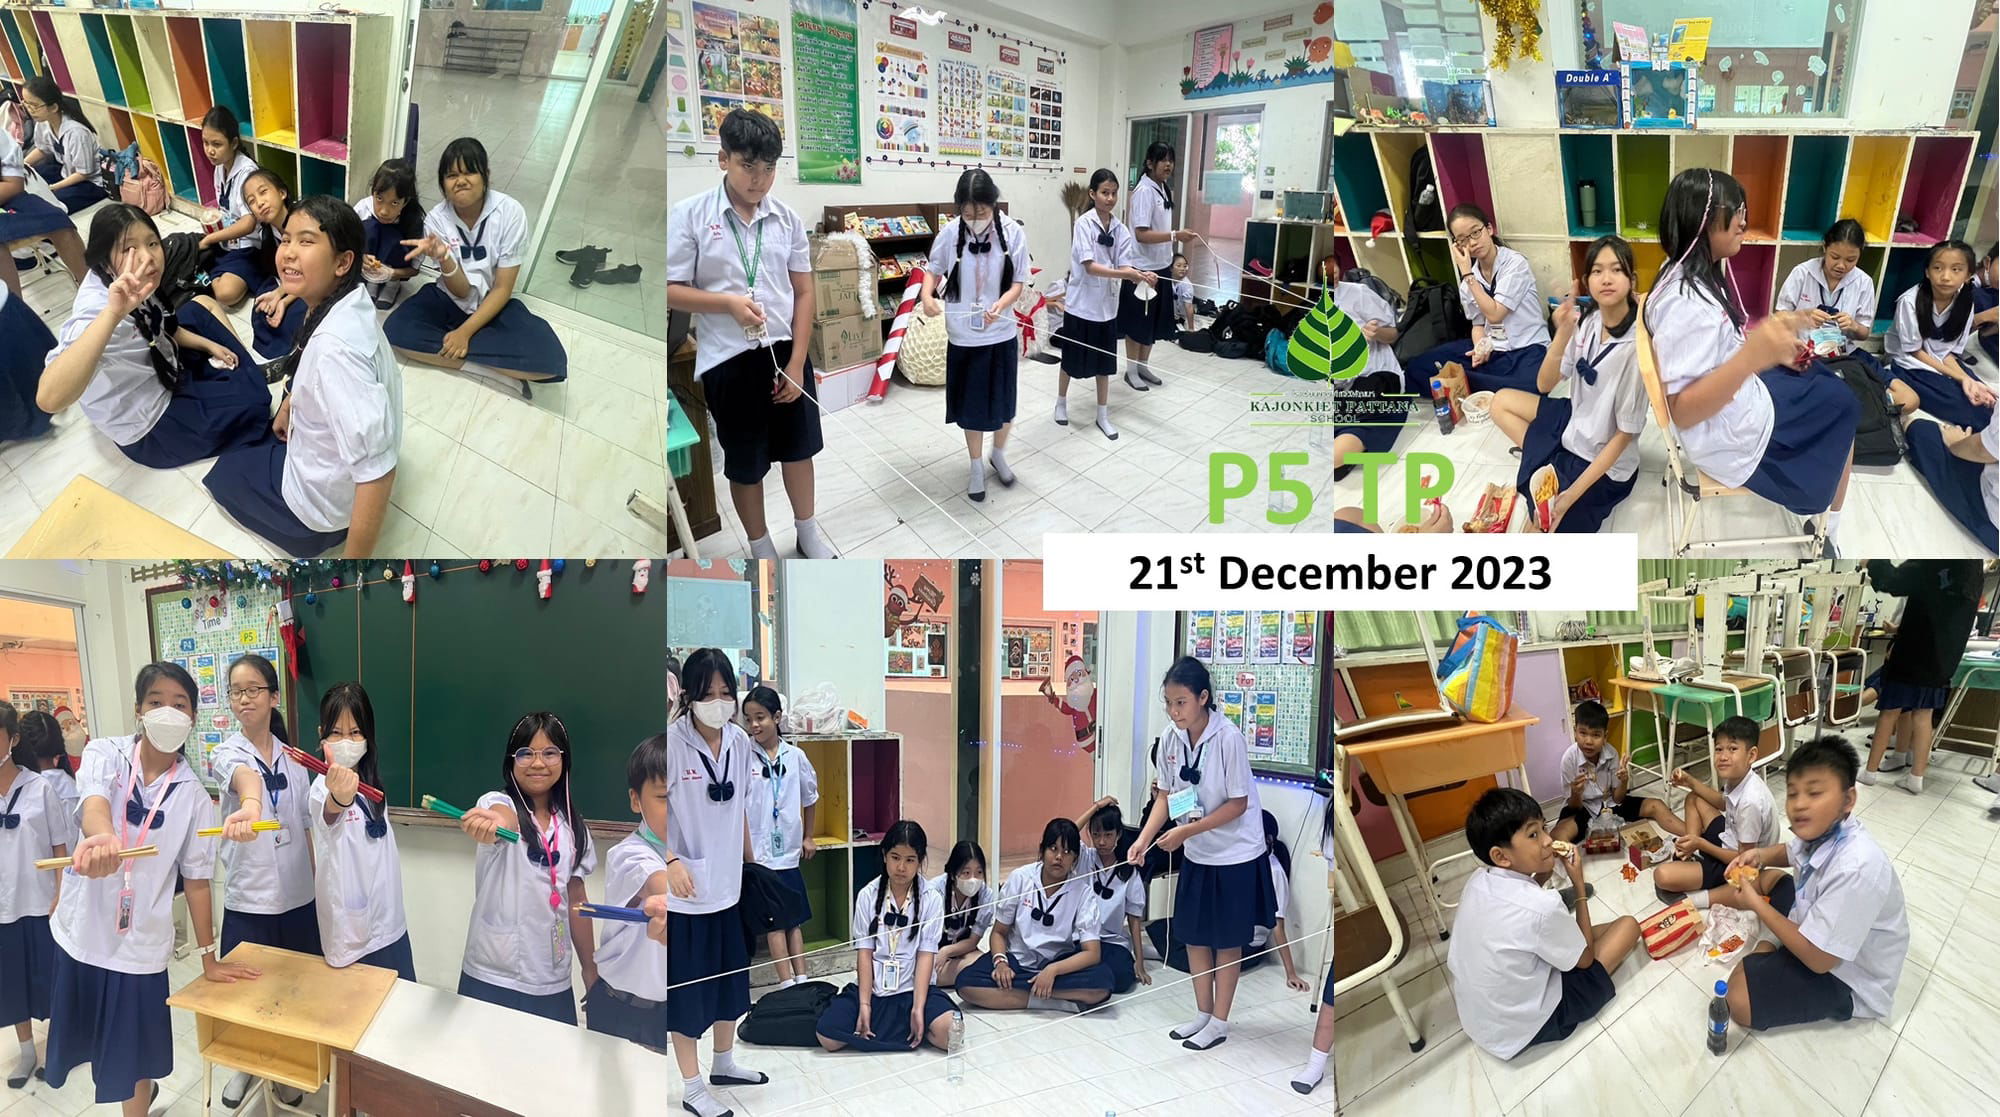 Week 9: Extra English Christmas Party, 21st December 2023